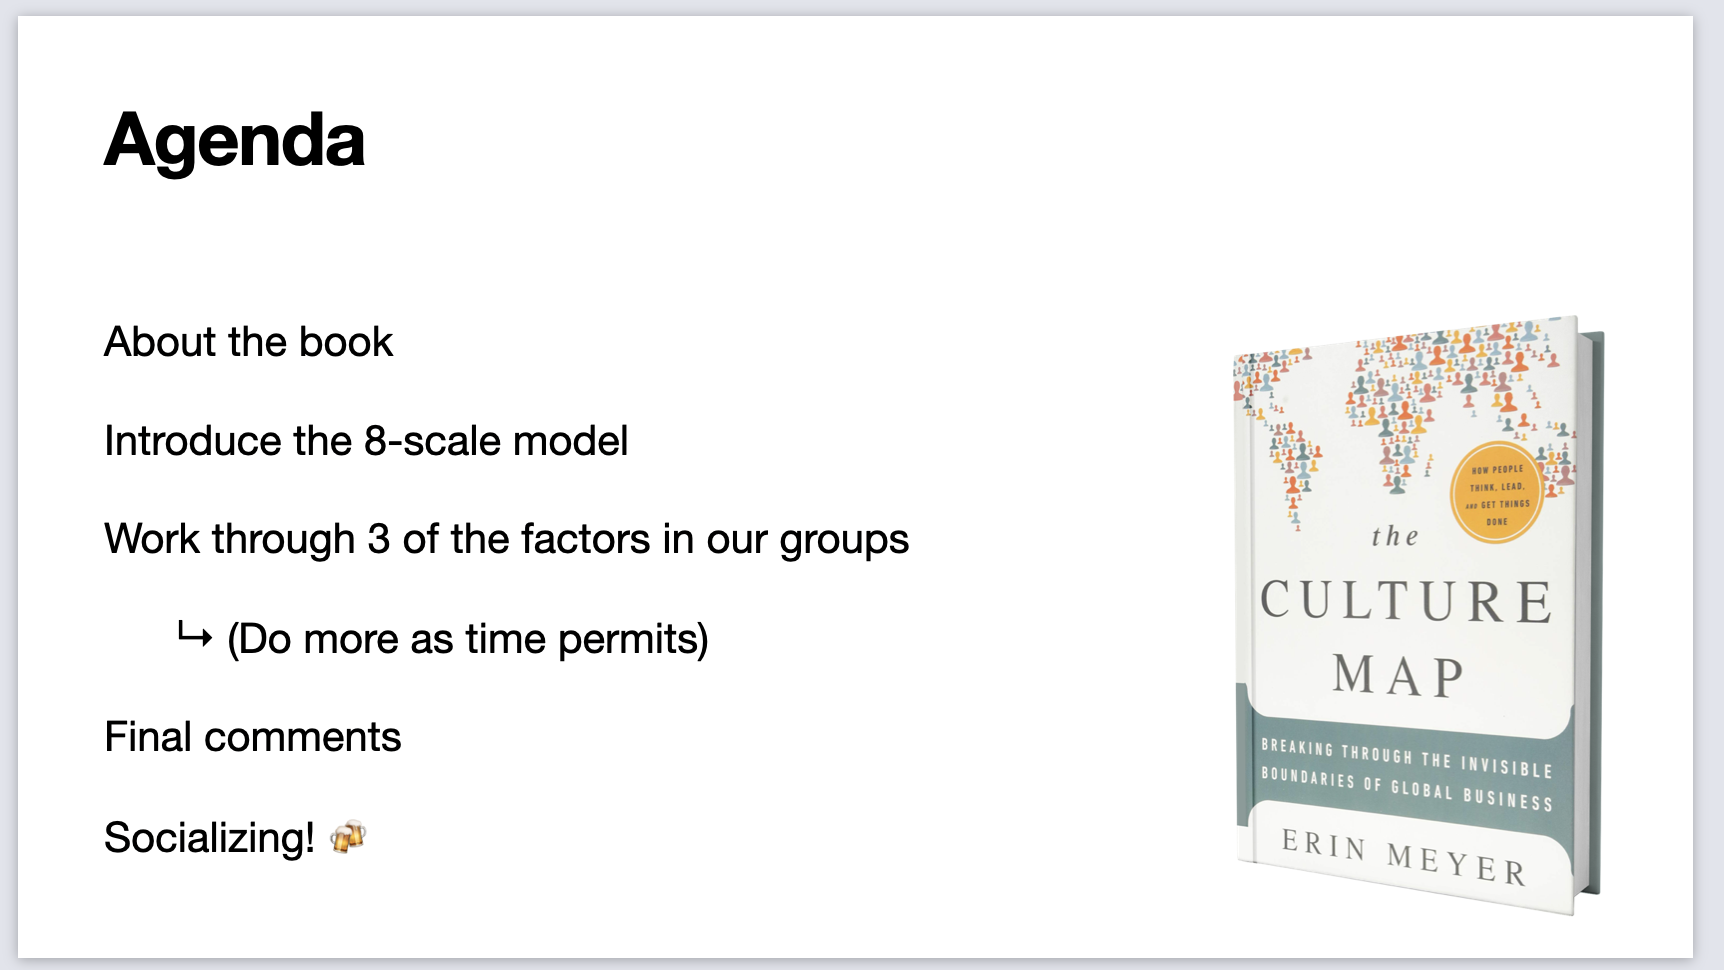 Presentation slide with a picture of the book and the Agenda:
&10;About the book
&10;Introduce the 8-scale model
&10;Work through 3 of the factors in our groups
&10;→ (Do more as time permits)
&10;Final comments
&10;Socializing! 🍻